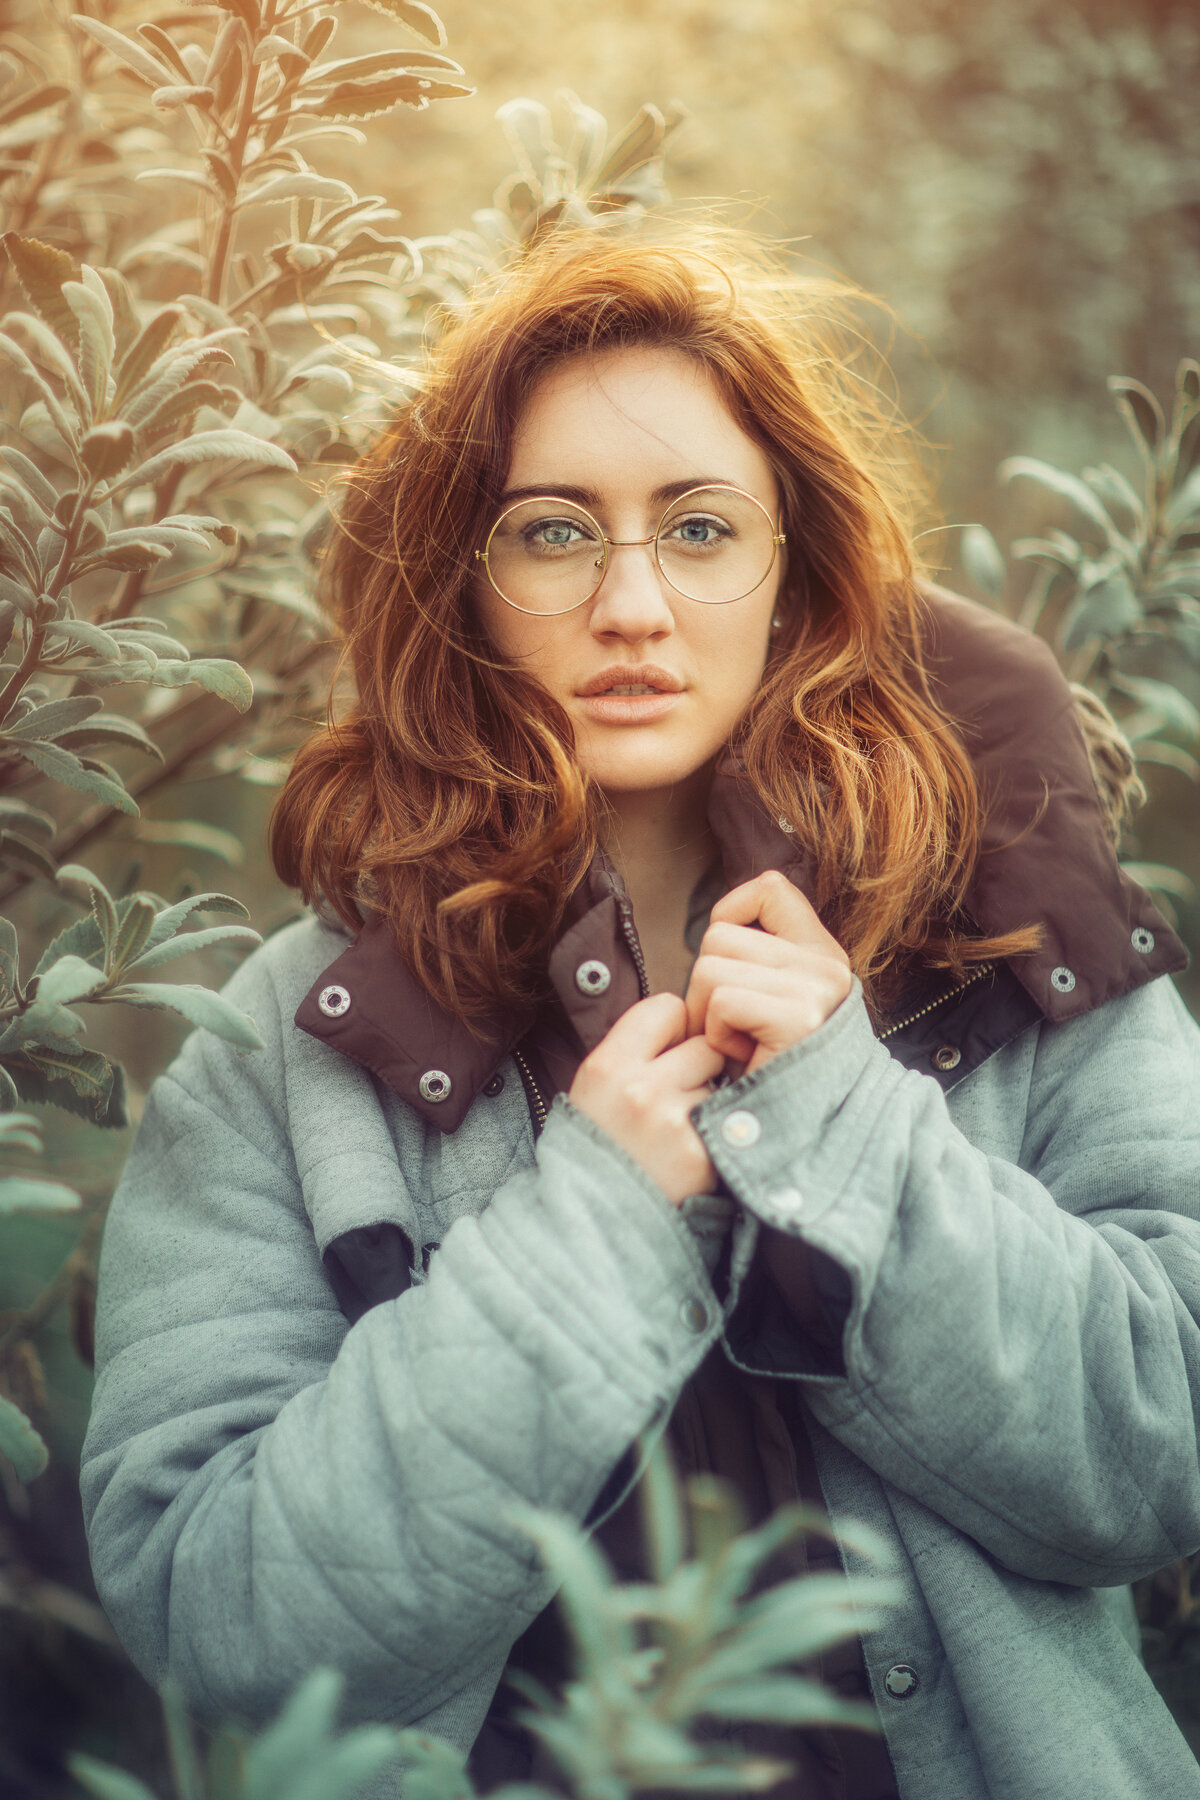 Portrait Photo Of Young Woman In Green Coat Los Angeles